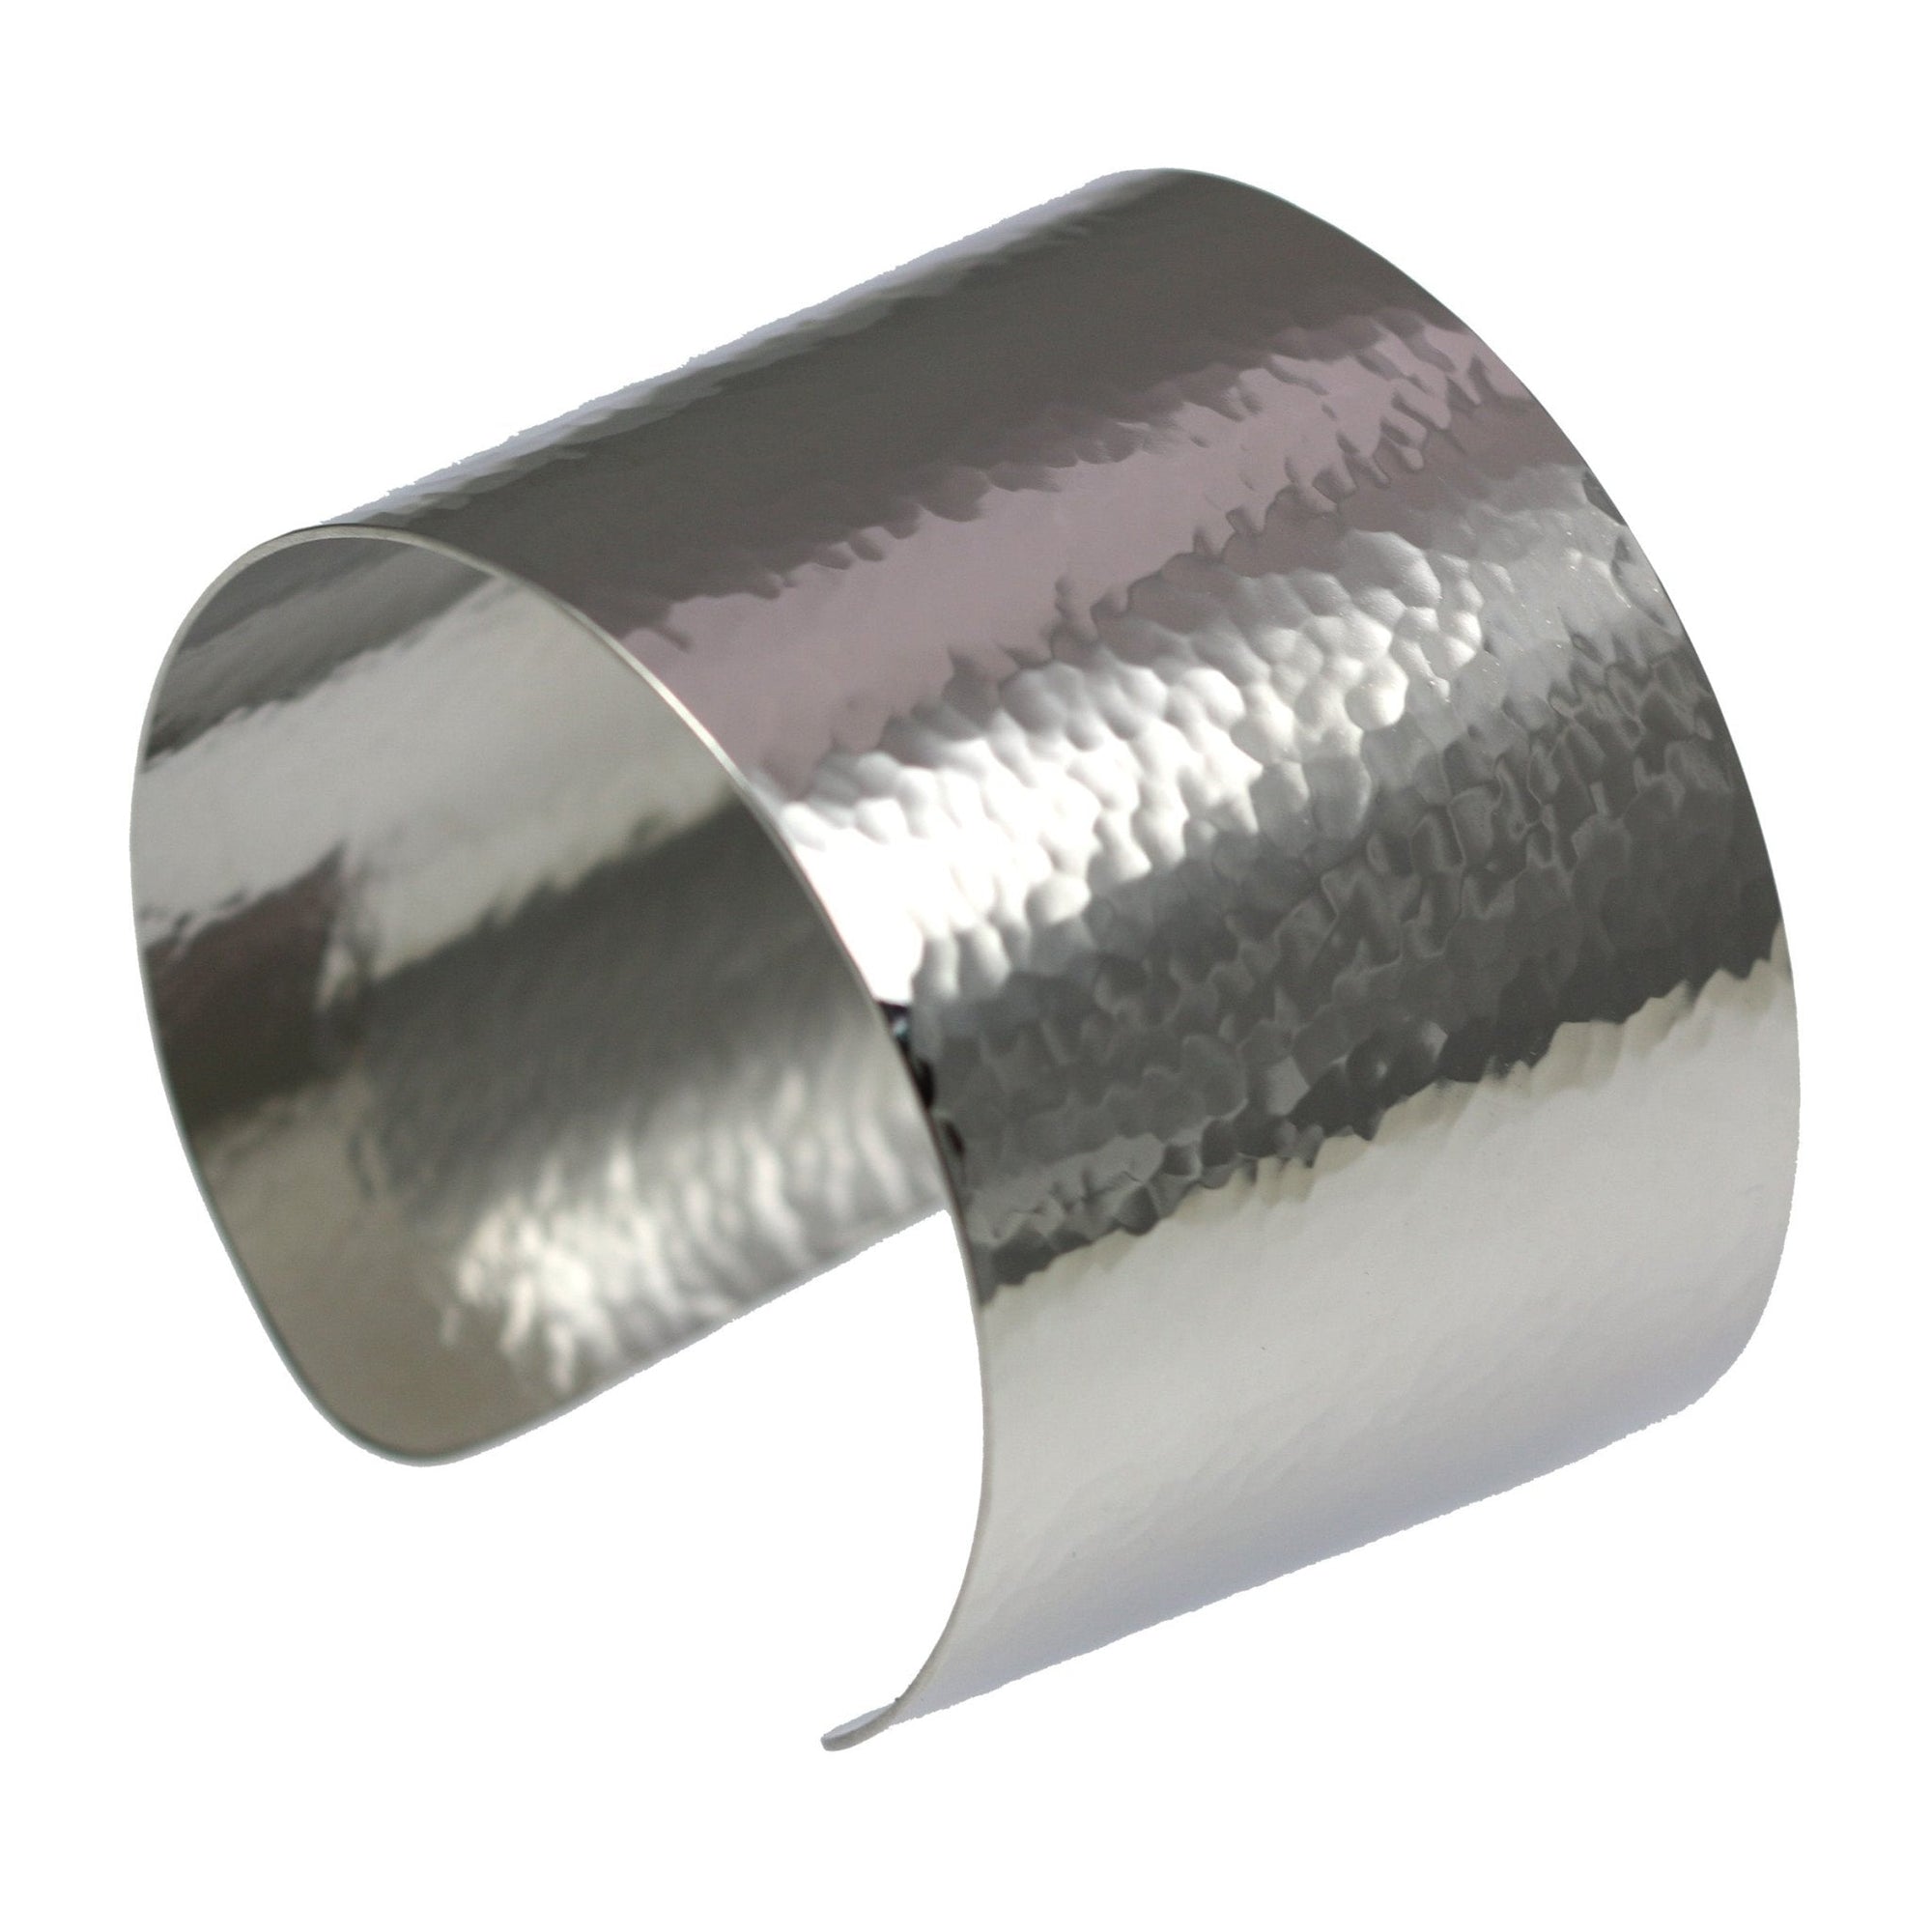 Hammered Stainless Steel Cuff Bracelet - Right View 